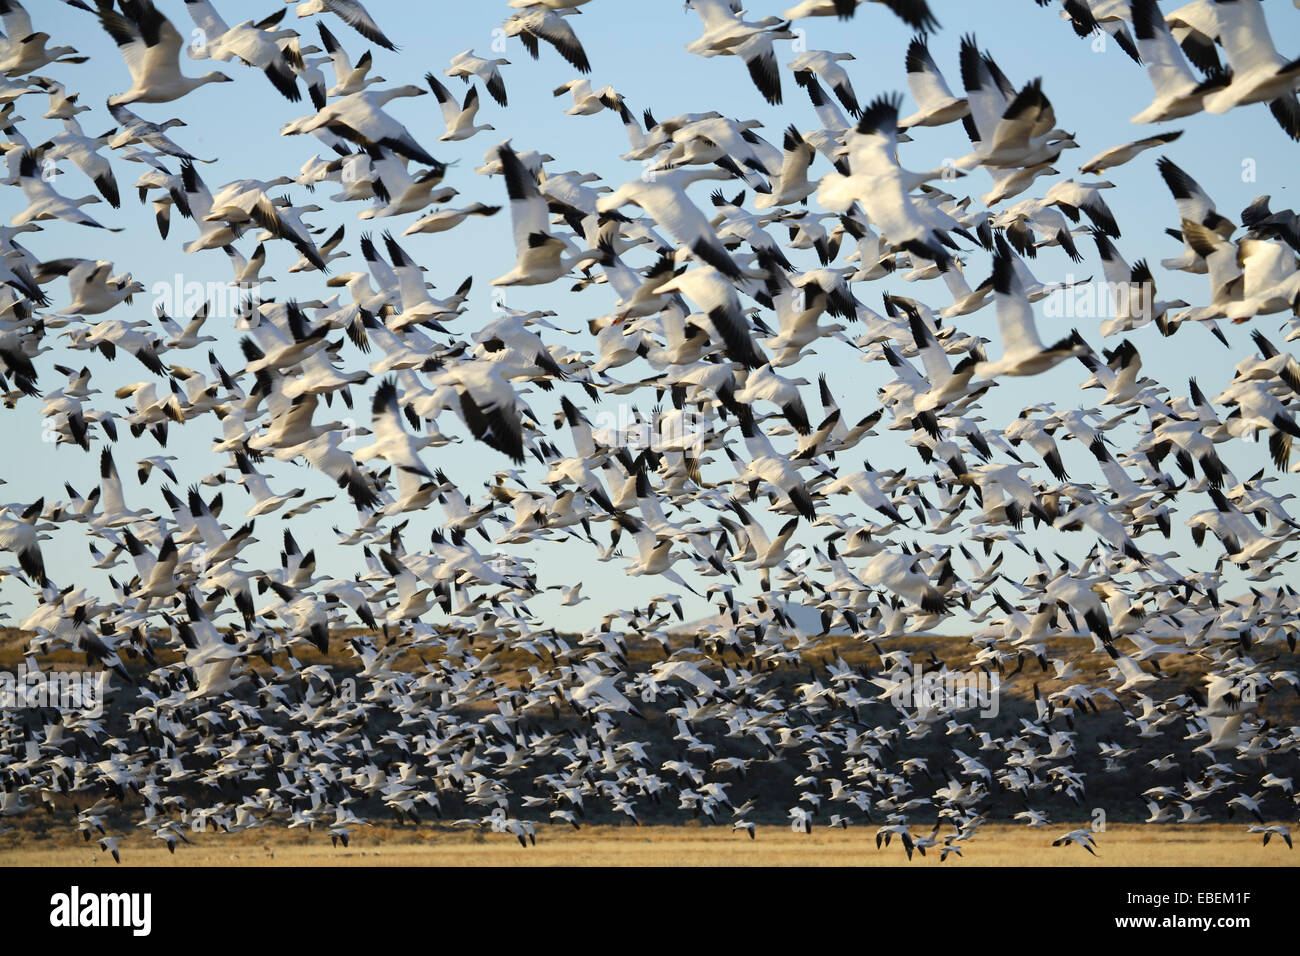 Snow geese (Chen caerulescens) in flight, Bosque del Apache National Wildlife Refuge, New Mexico USA Stock Photo